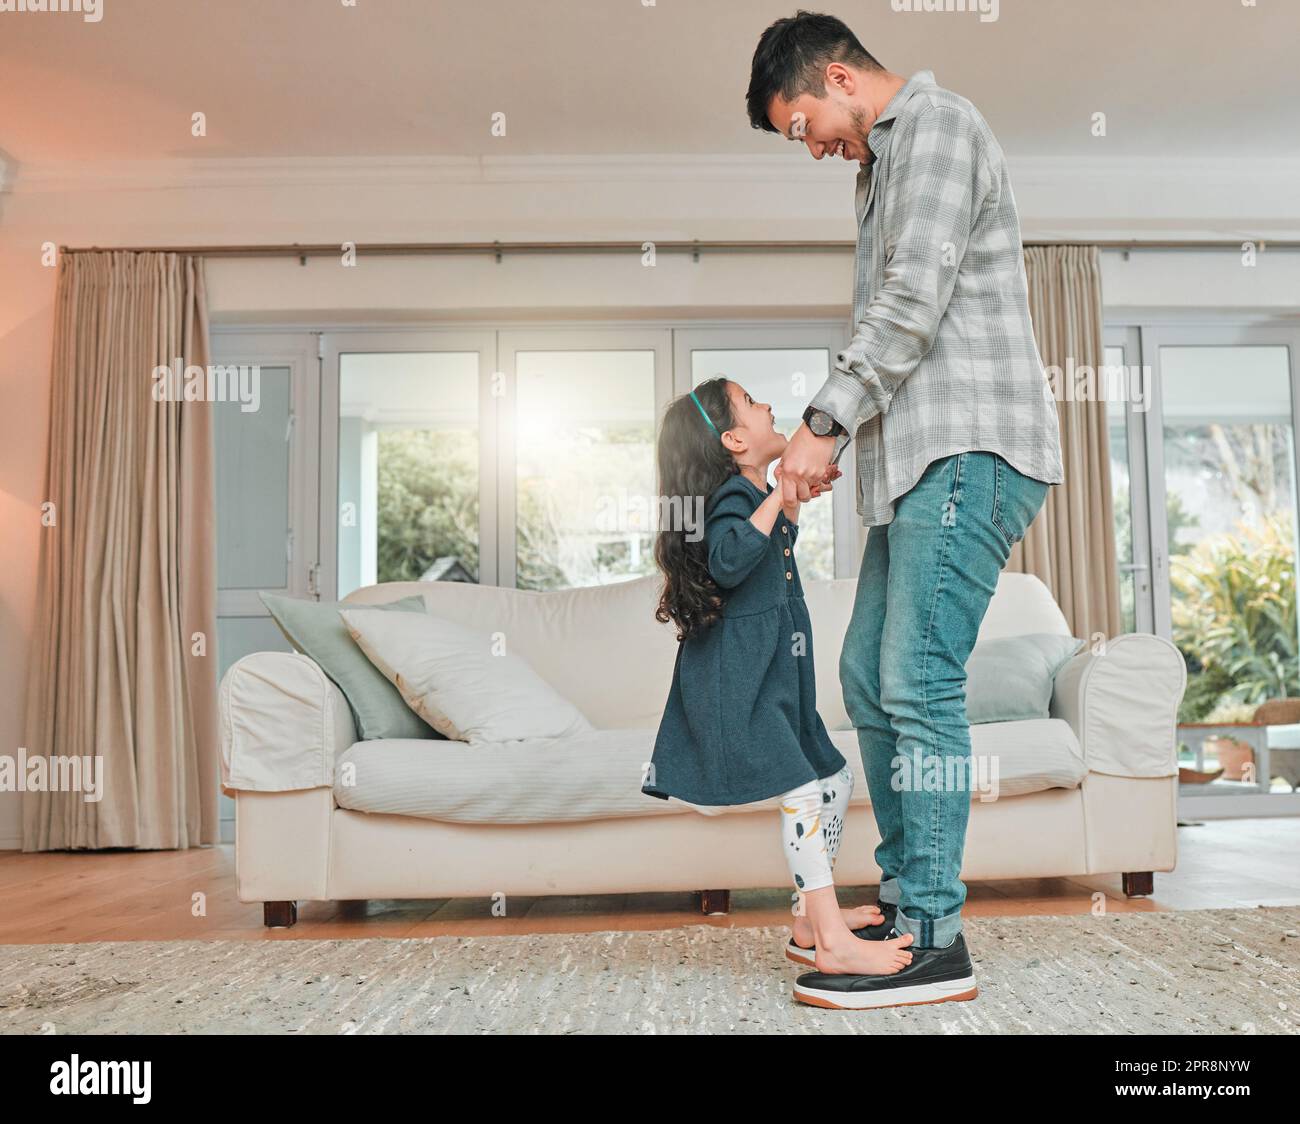 An invested dad is the greatest dad. a father practicing a dance routine with his daughter at home. Stock Photo